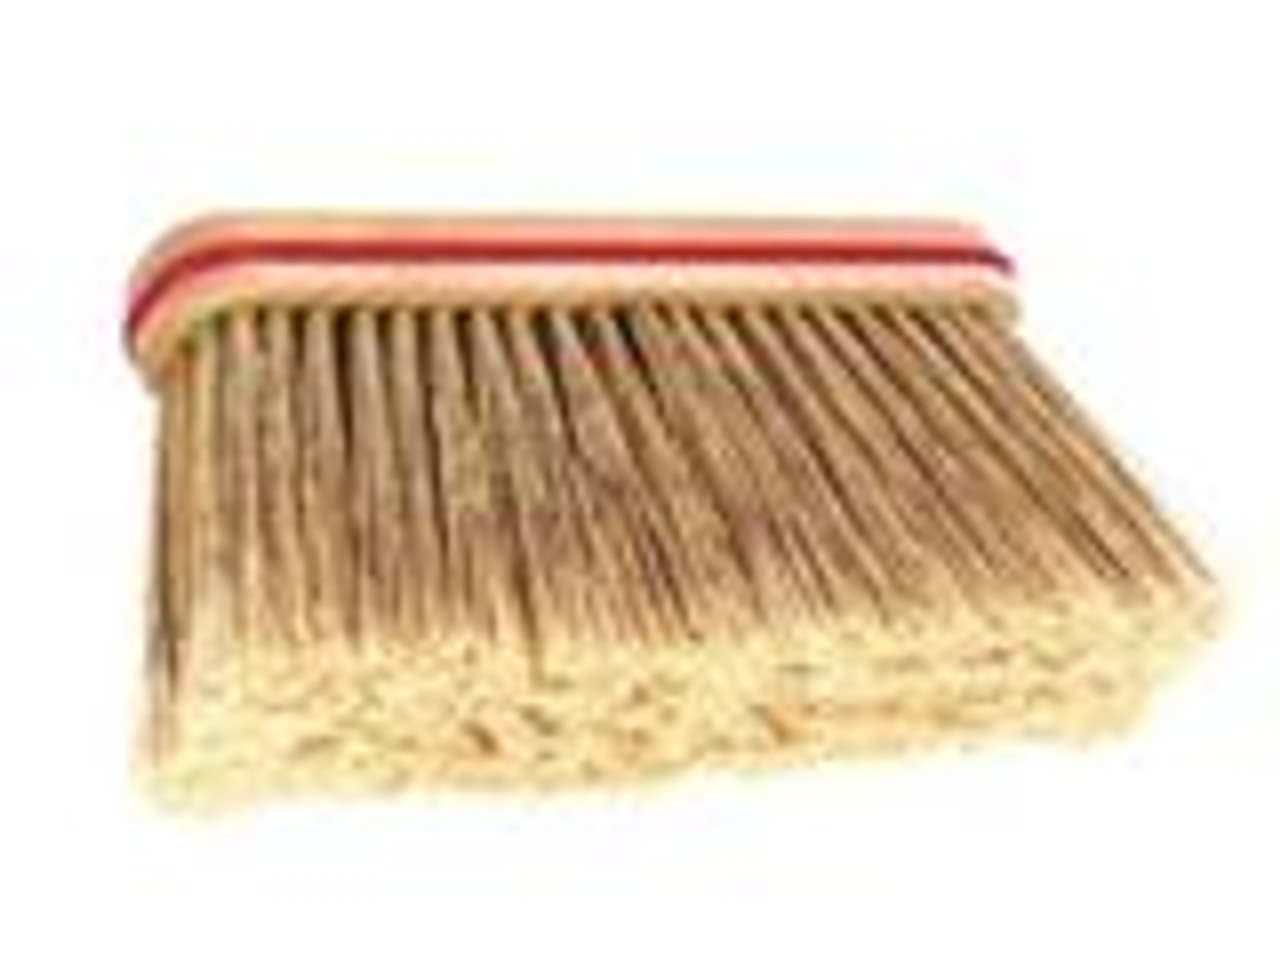 Standard Angle Broom Head and Dust Mop Head Bundle with 2 Handles